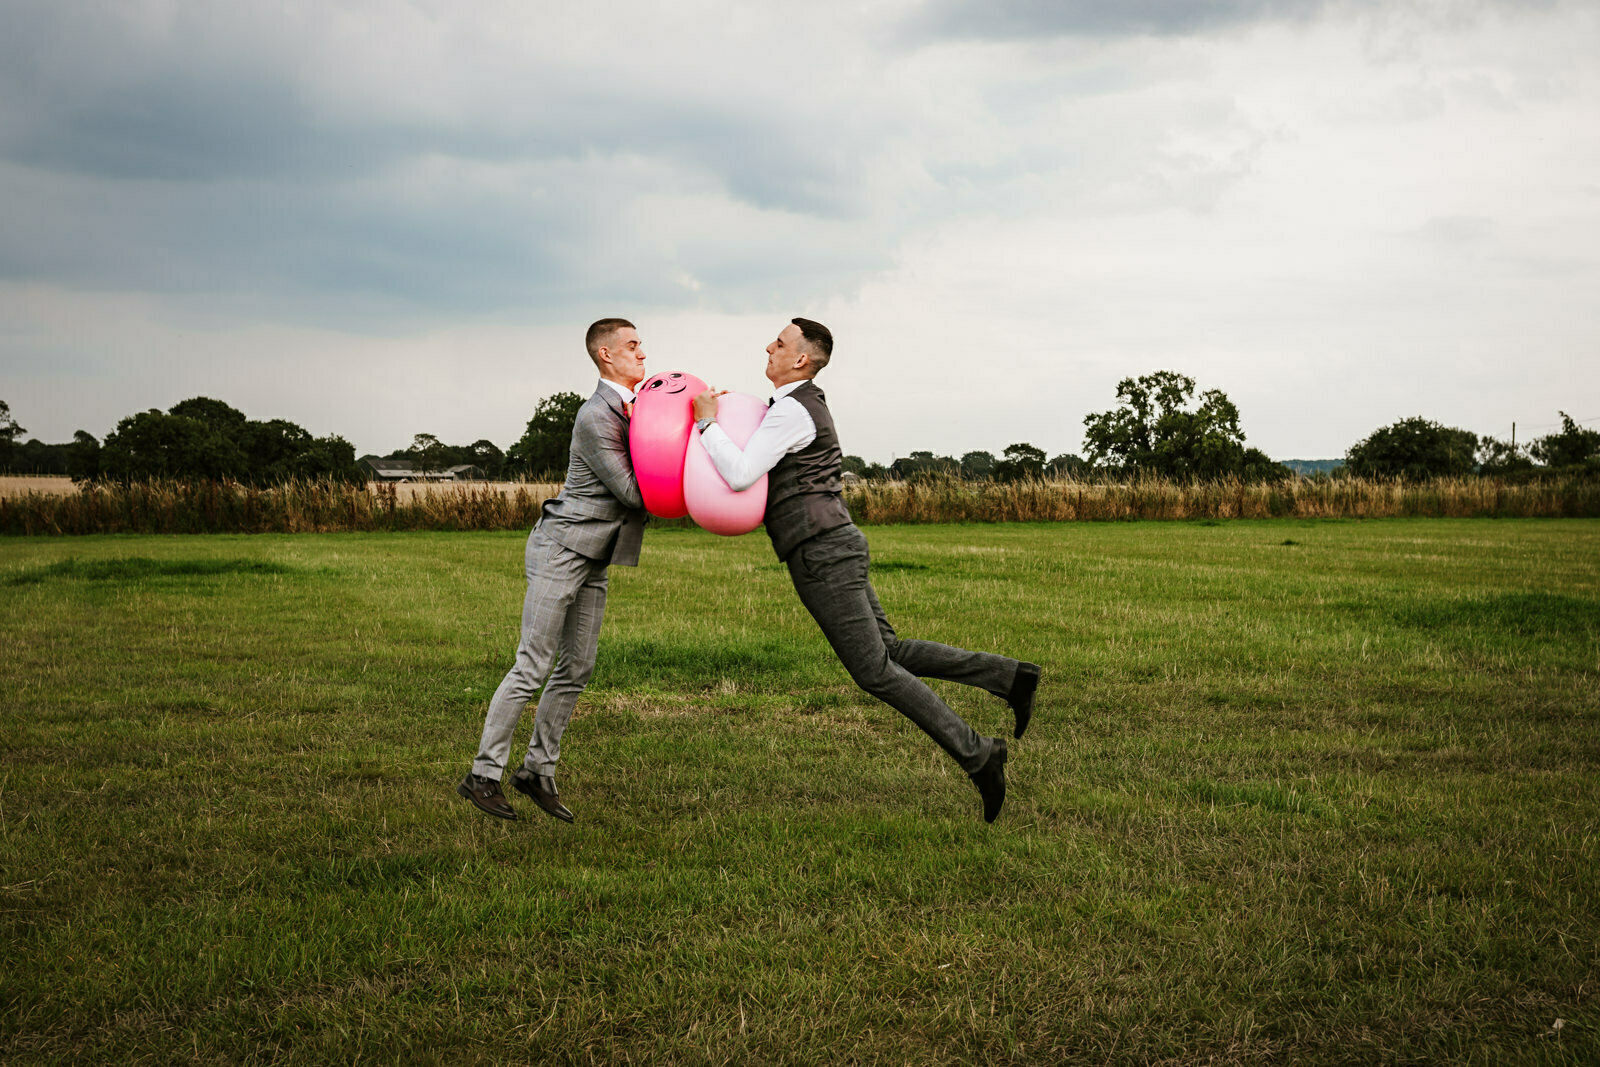 Space hoppers at wedding